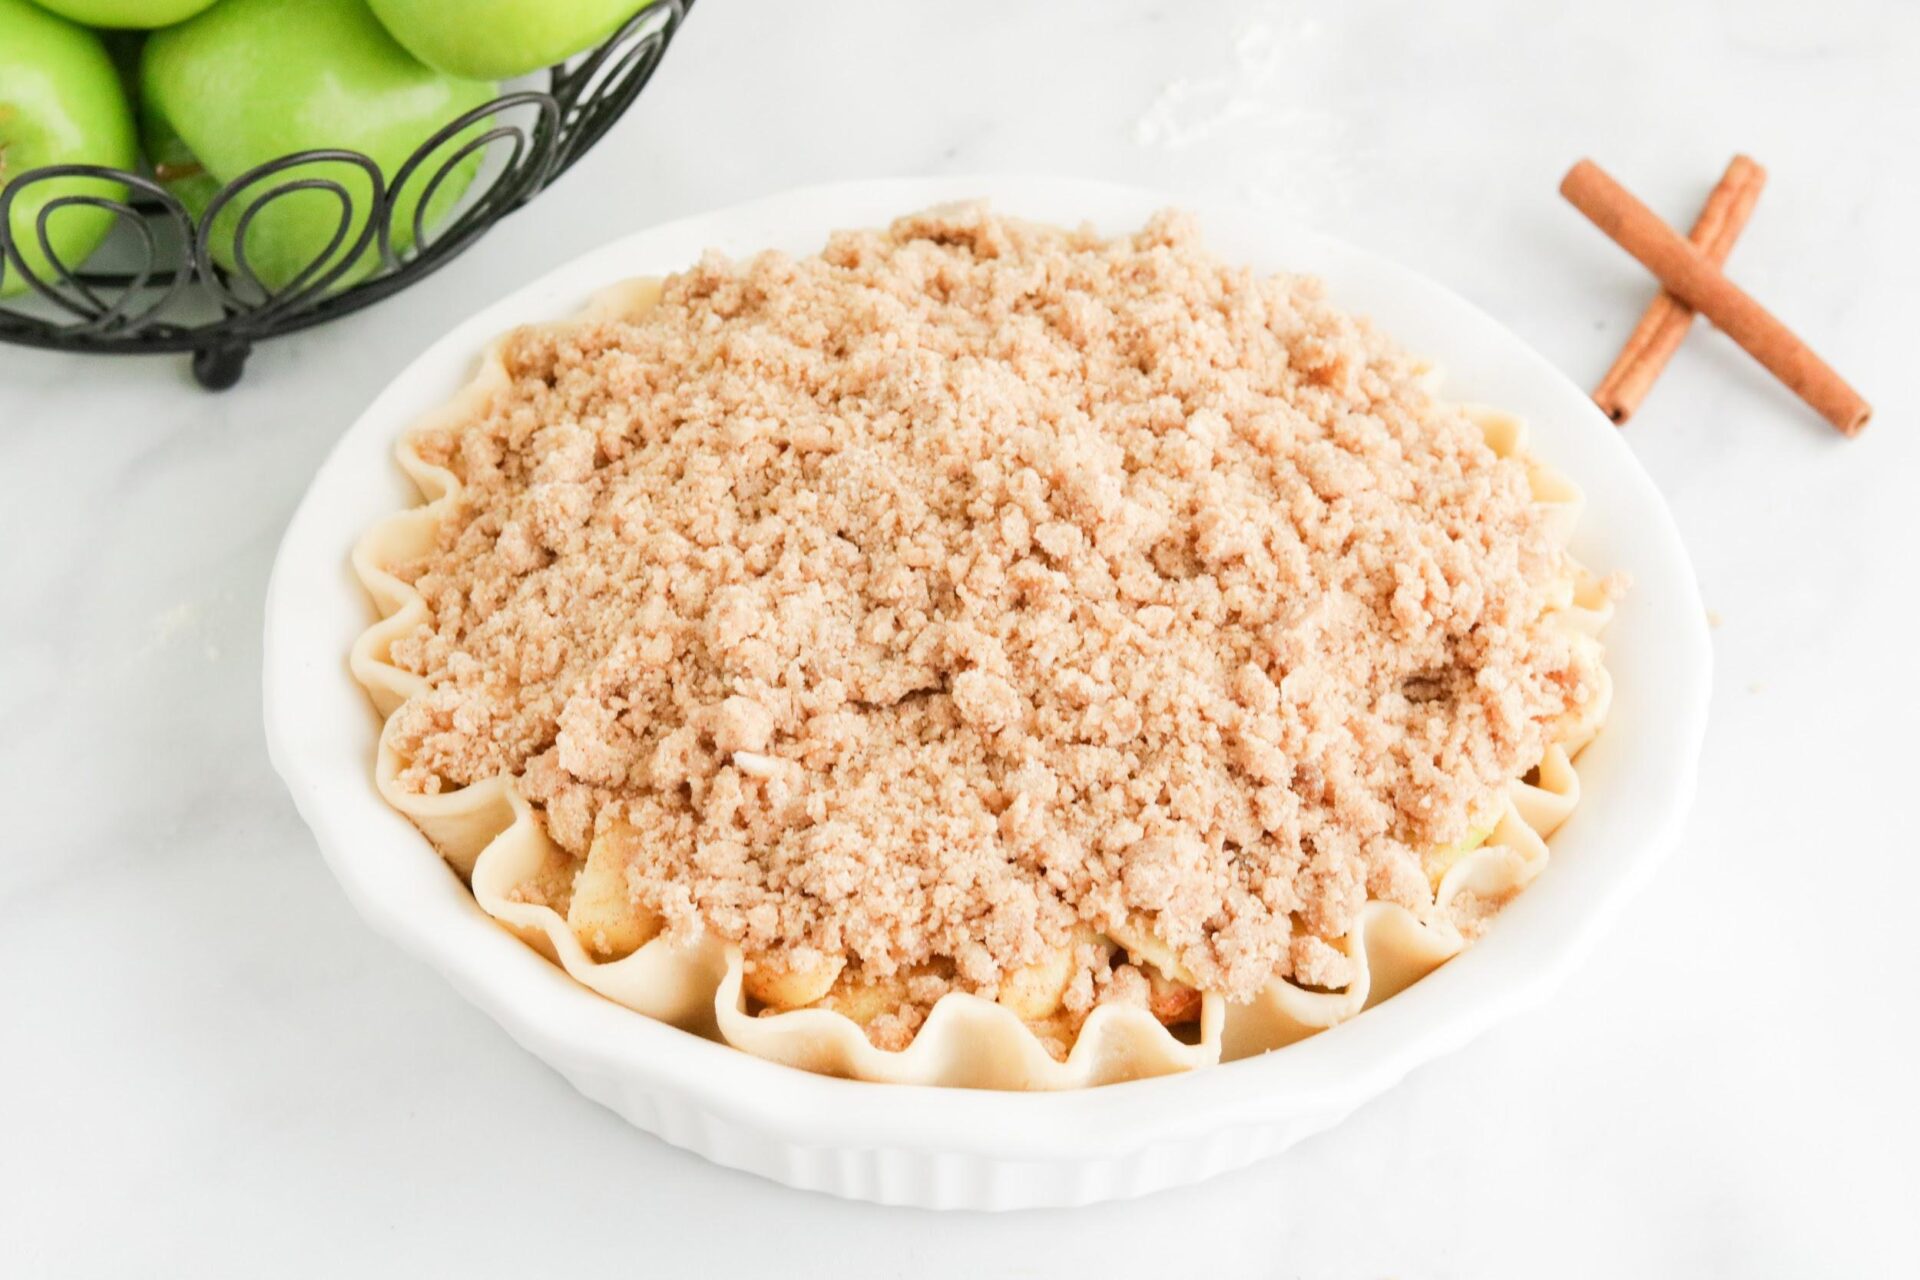 uncooked Apple crumble pie ith white surface